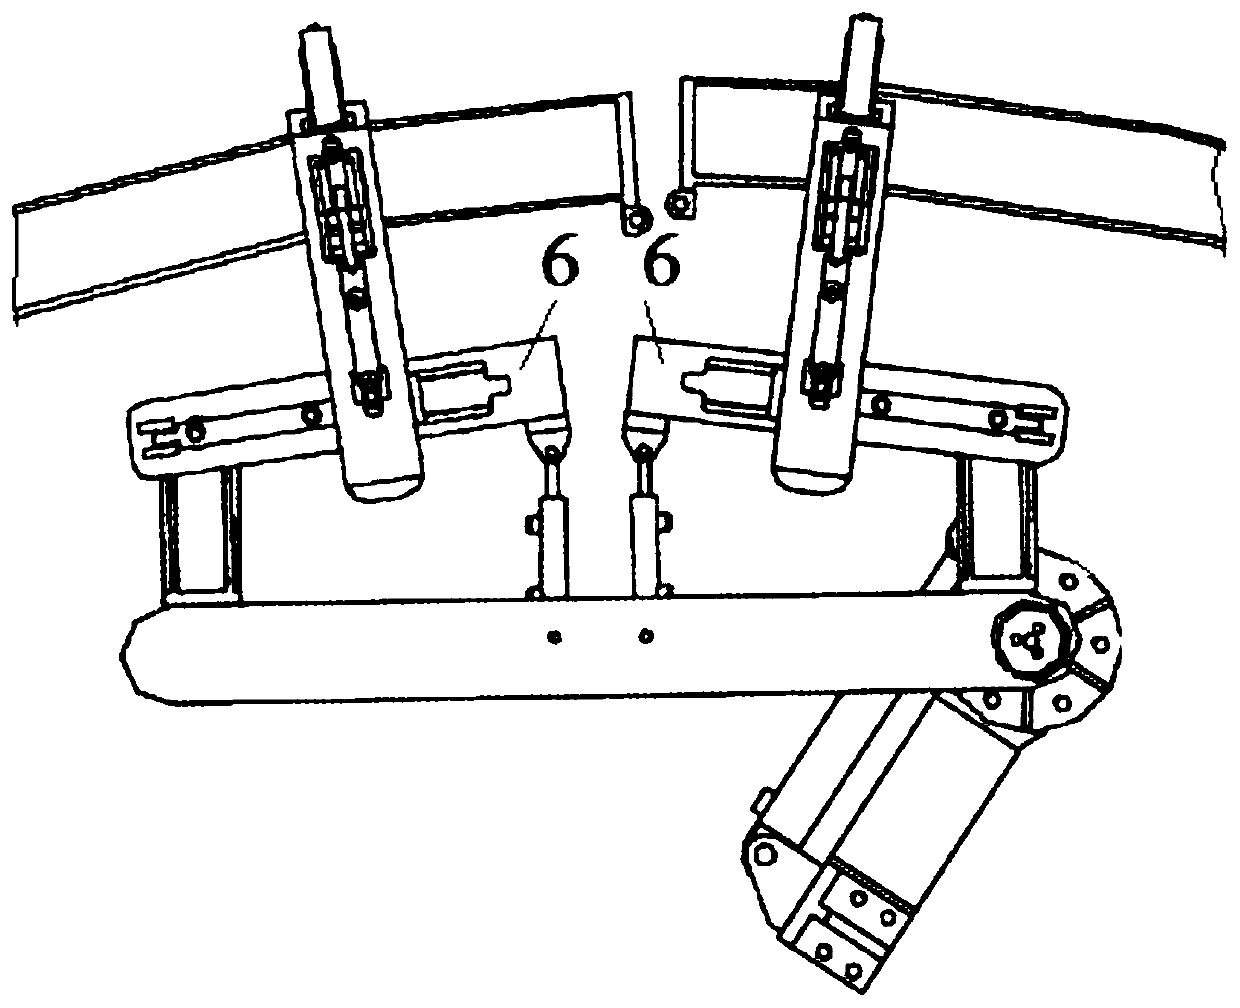 Butt joint device